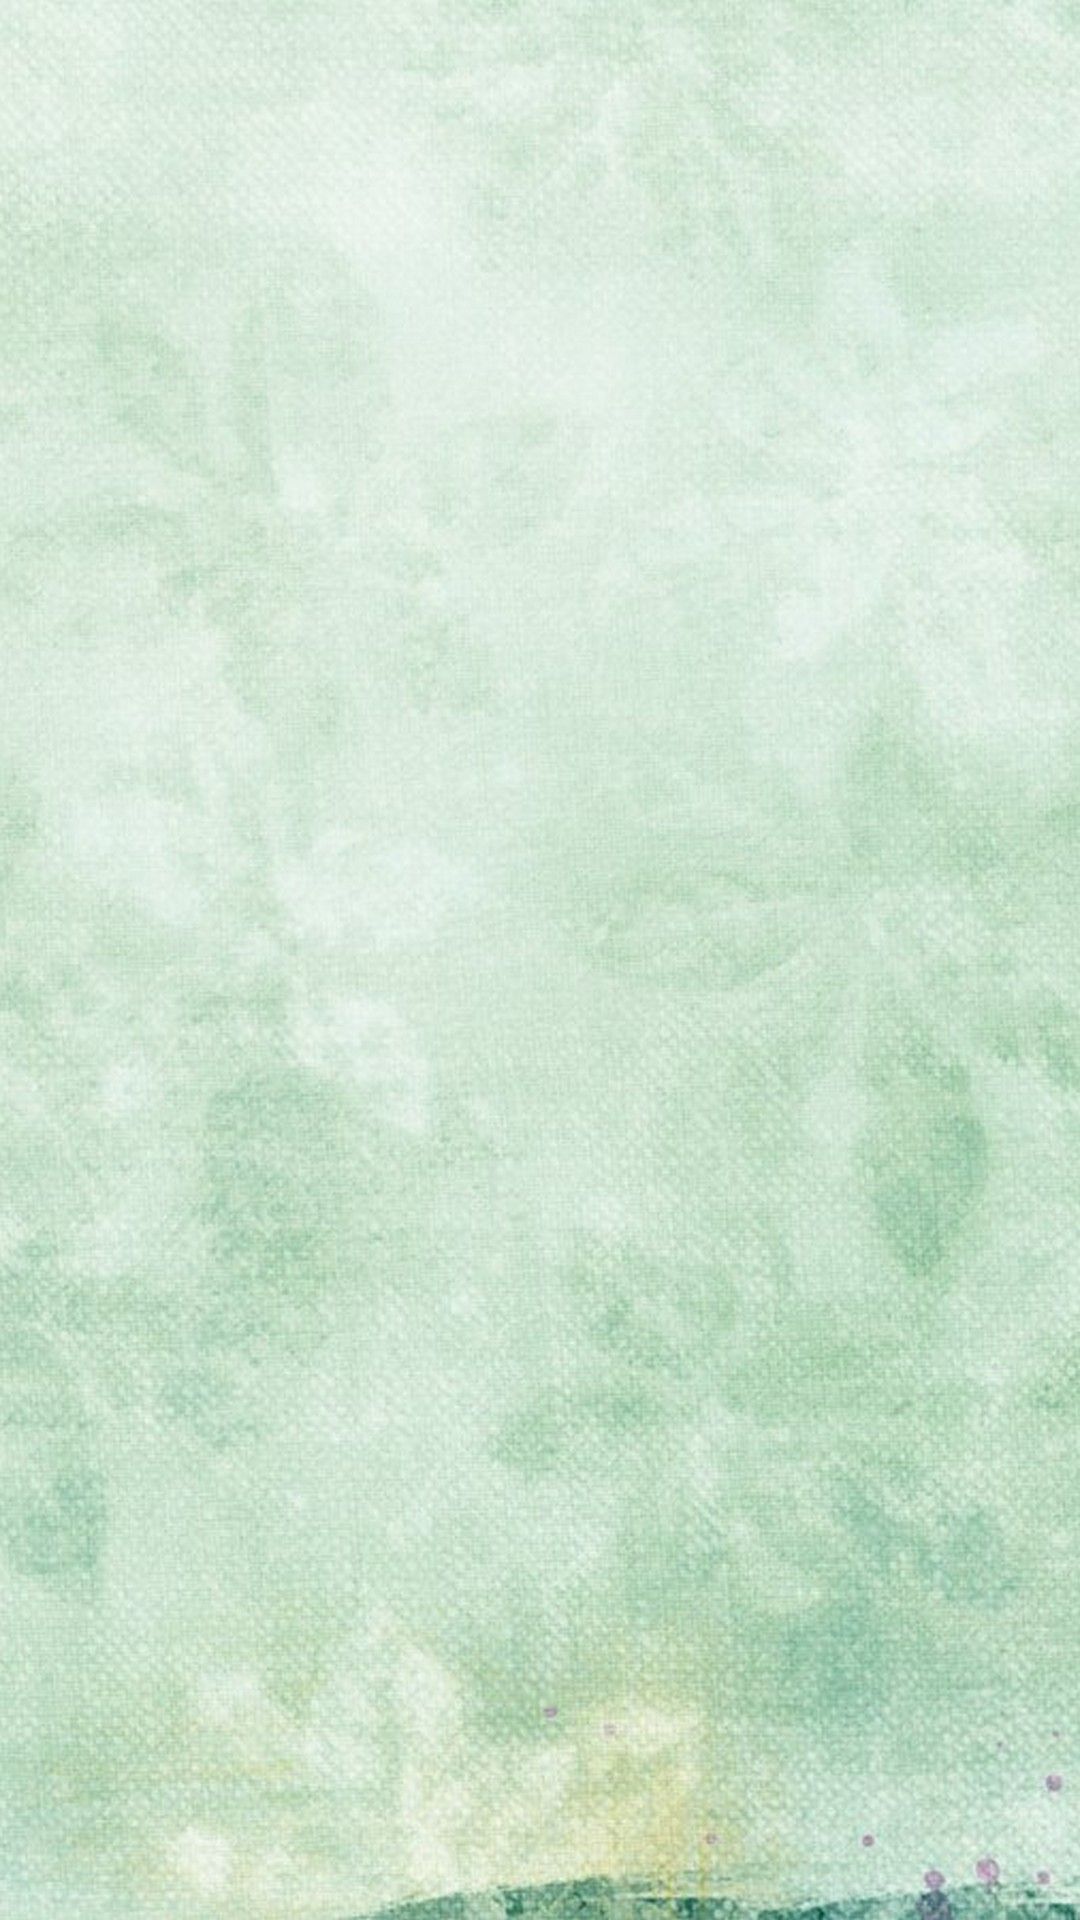 Green And Gold Phone Wallpaper. Mint green wallpaper, Mint green wallpaper iphone, Mint green background